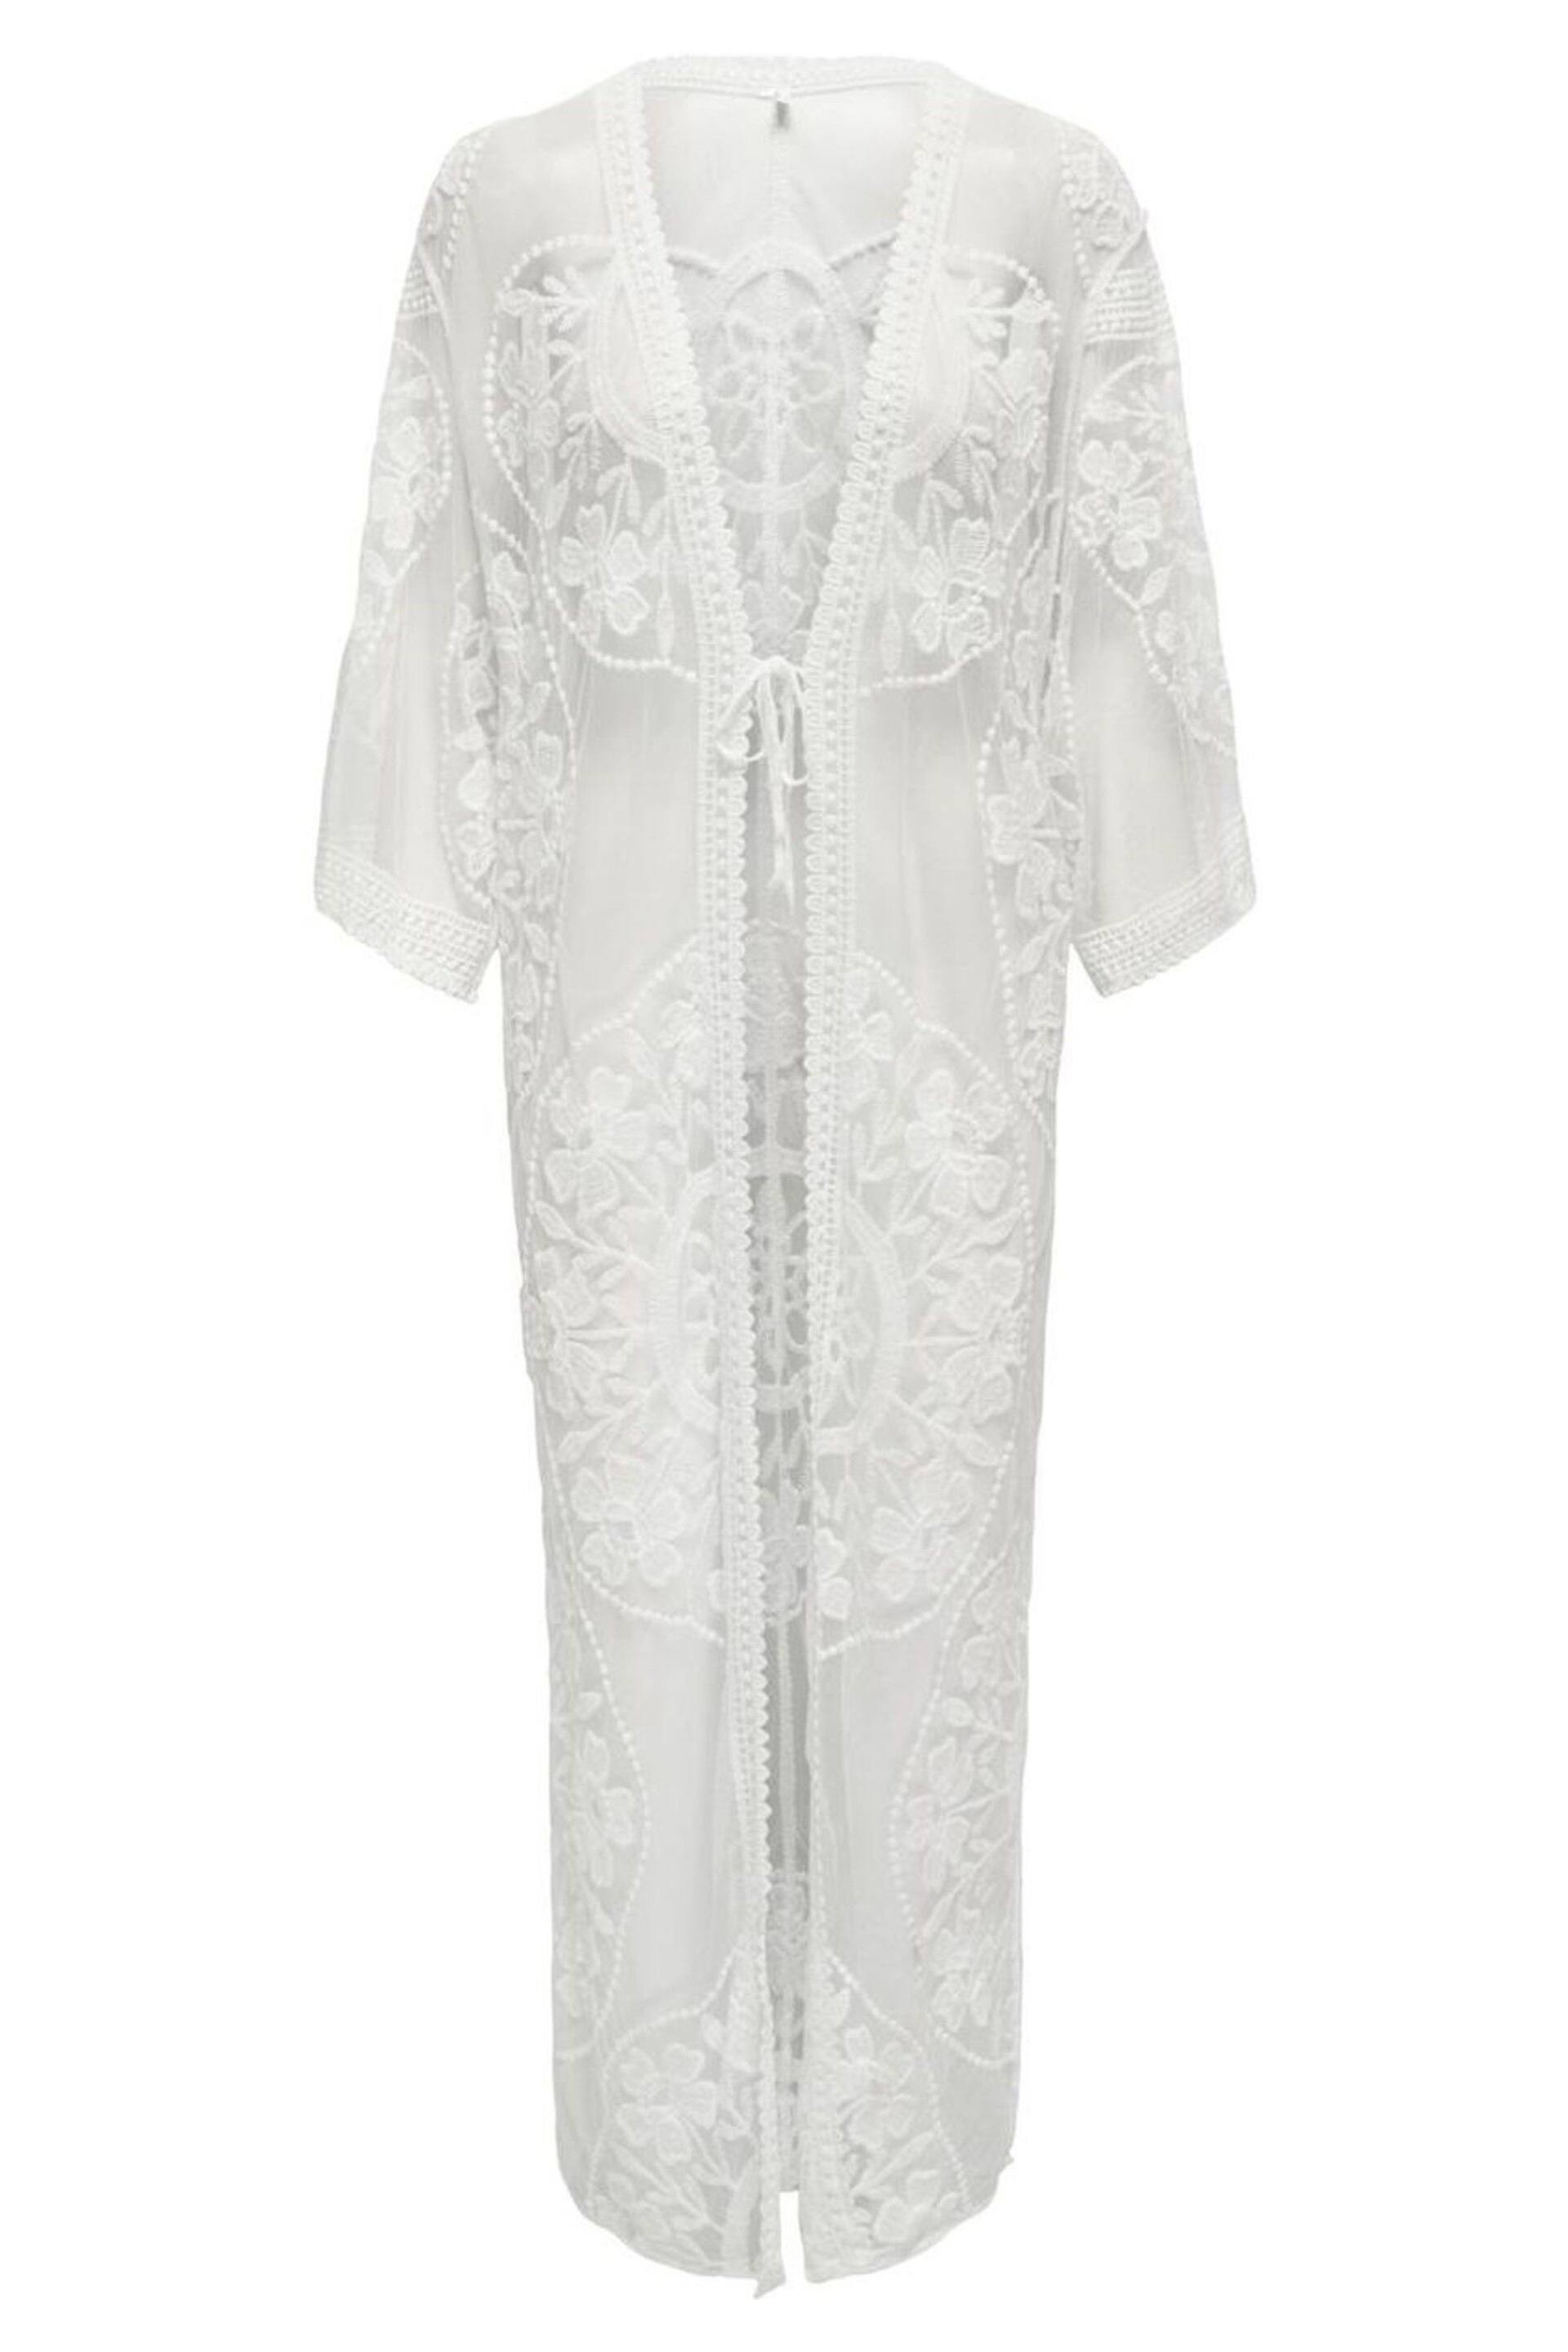 ONLY White Embroidered Maxi Beach Cover-Up Kaftan - Image 4 of 5